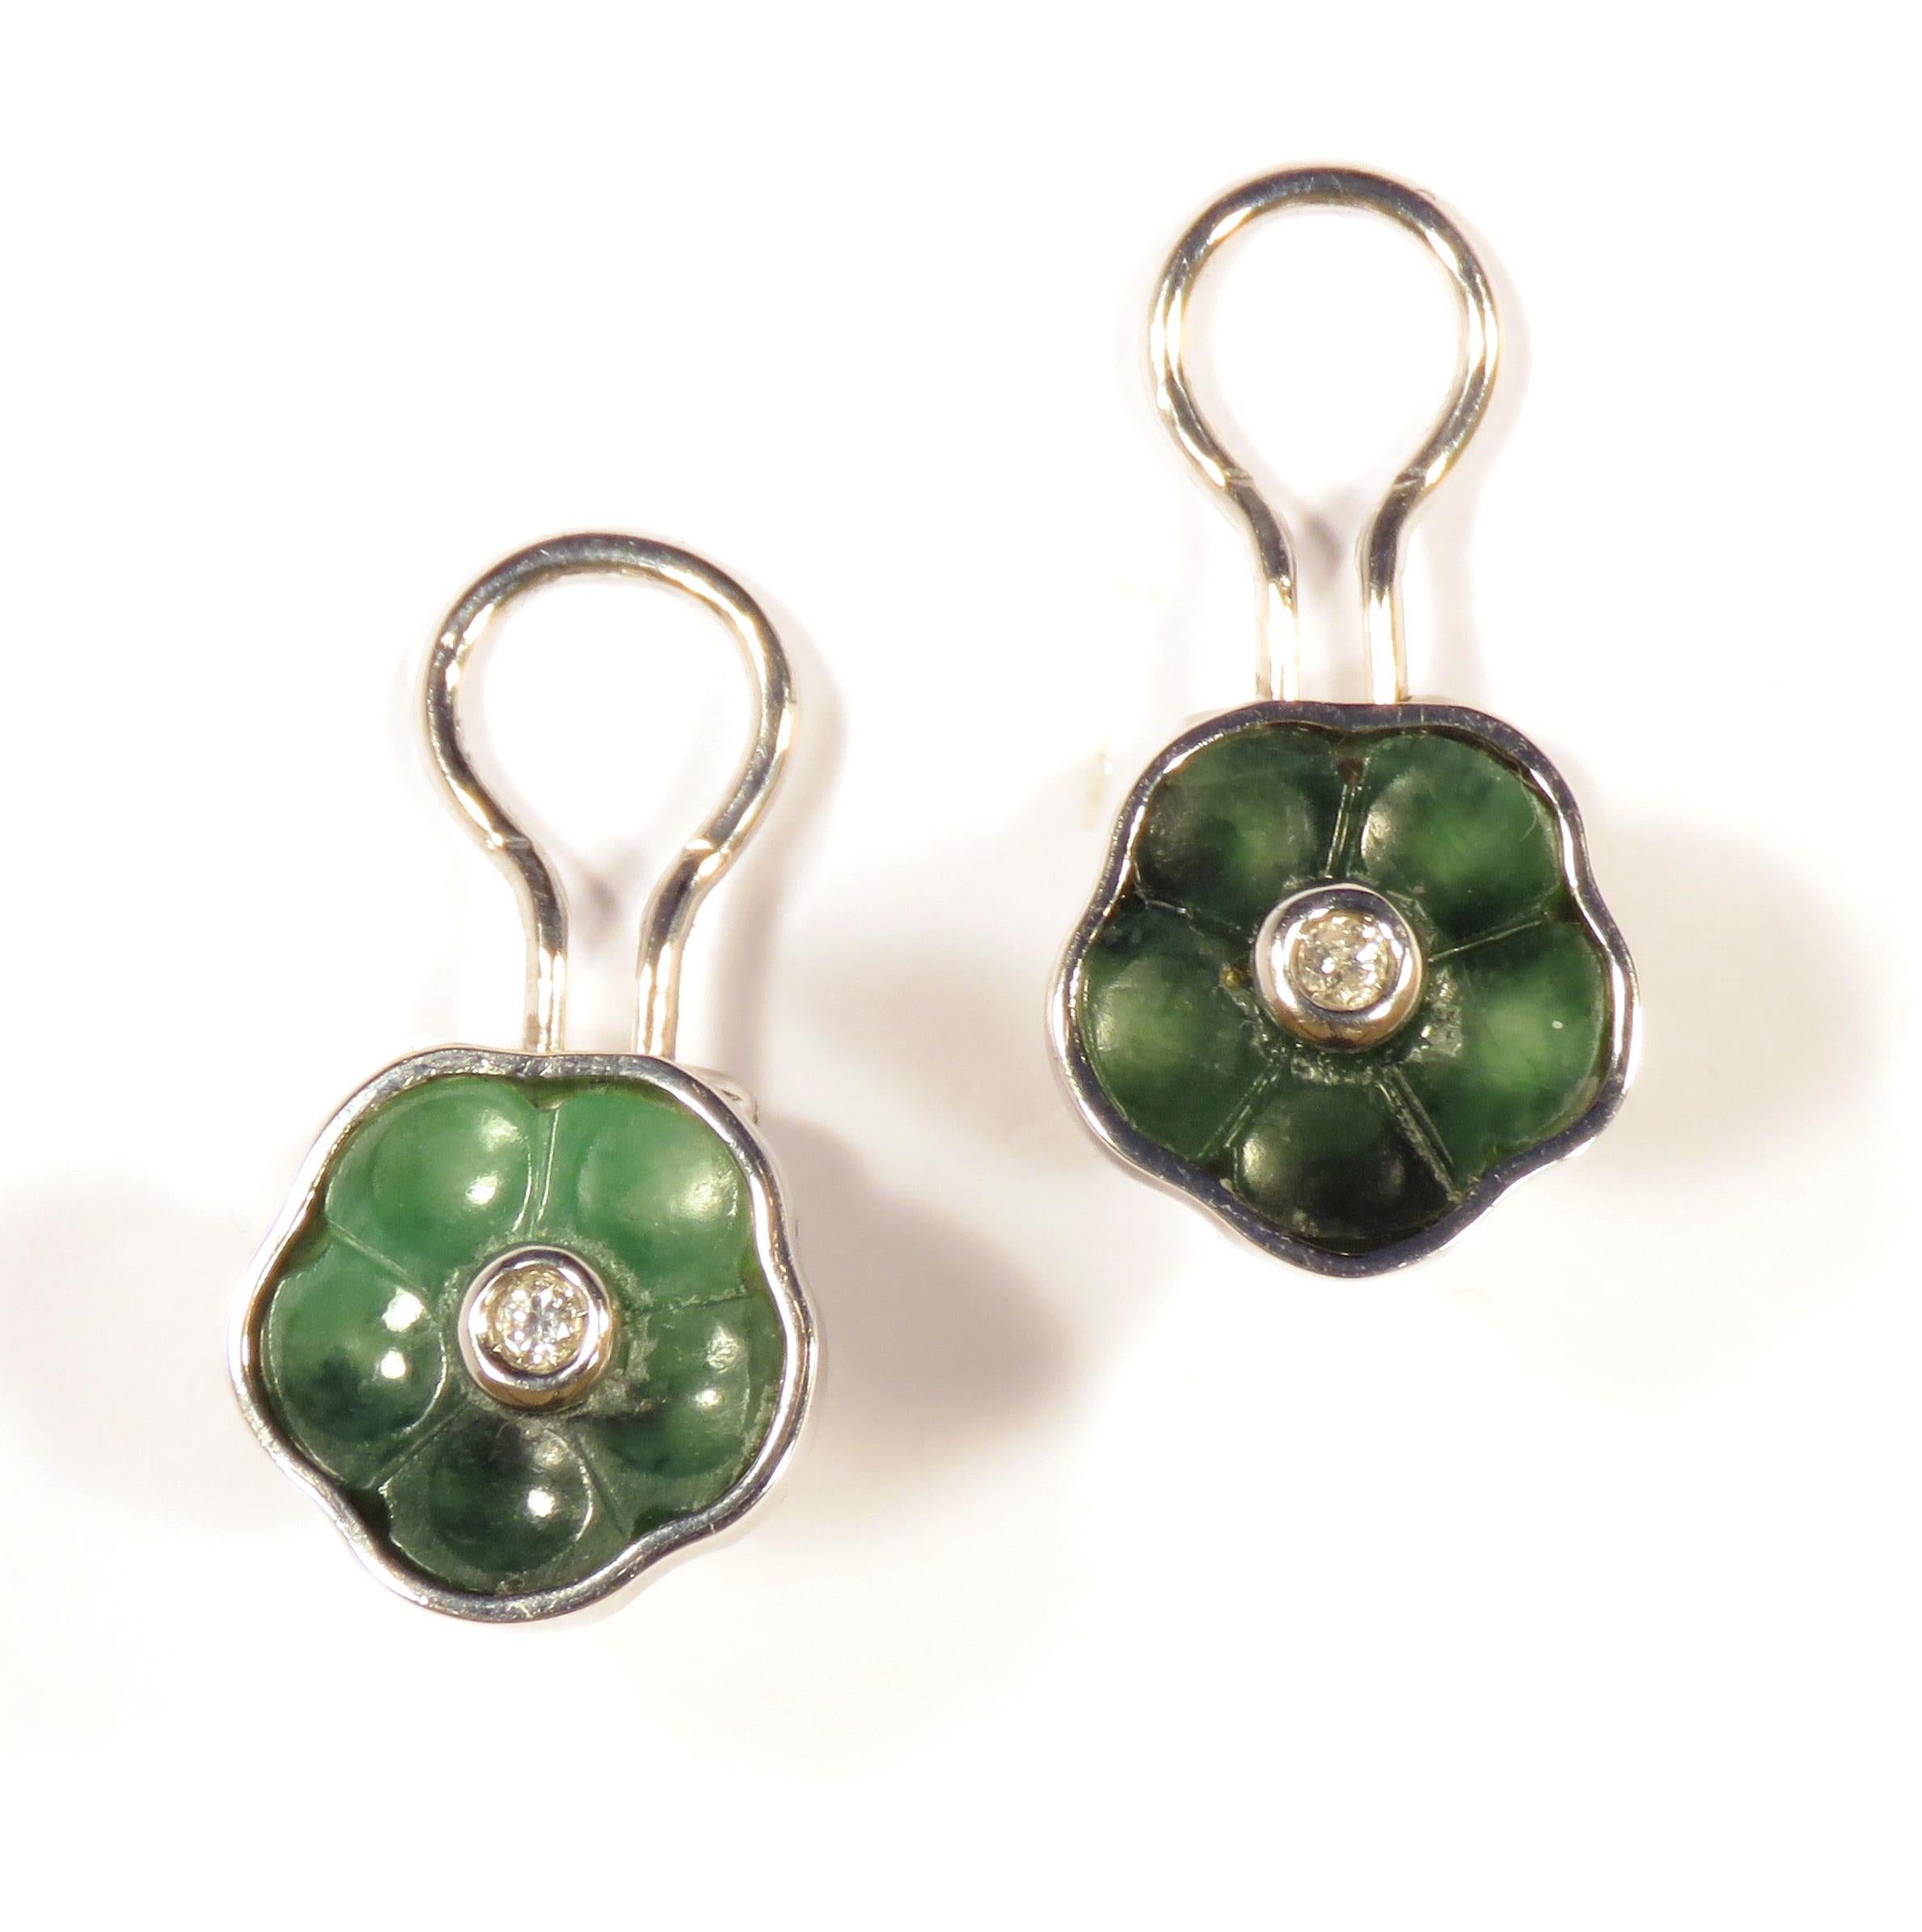 18 karat white gold clip-on earrings with flowers jades and two diamonds 0.10 ctw. The circumference of each jade gemstone is 13 mm /  0.511 inches. These clip-on earrings are marked with the Italian Gold Mark 750 and Botta Gioielli brandmark